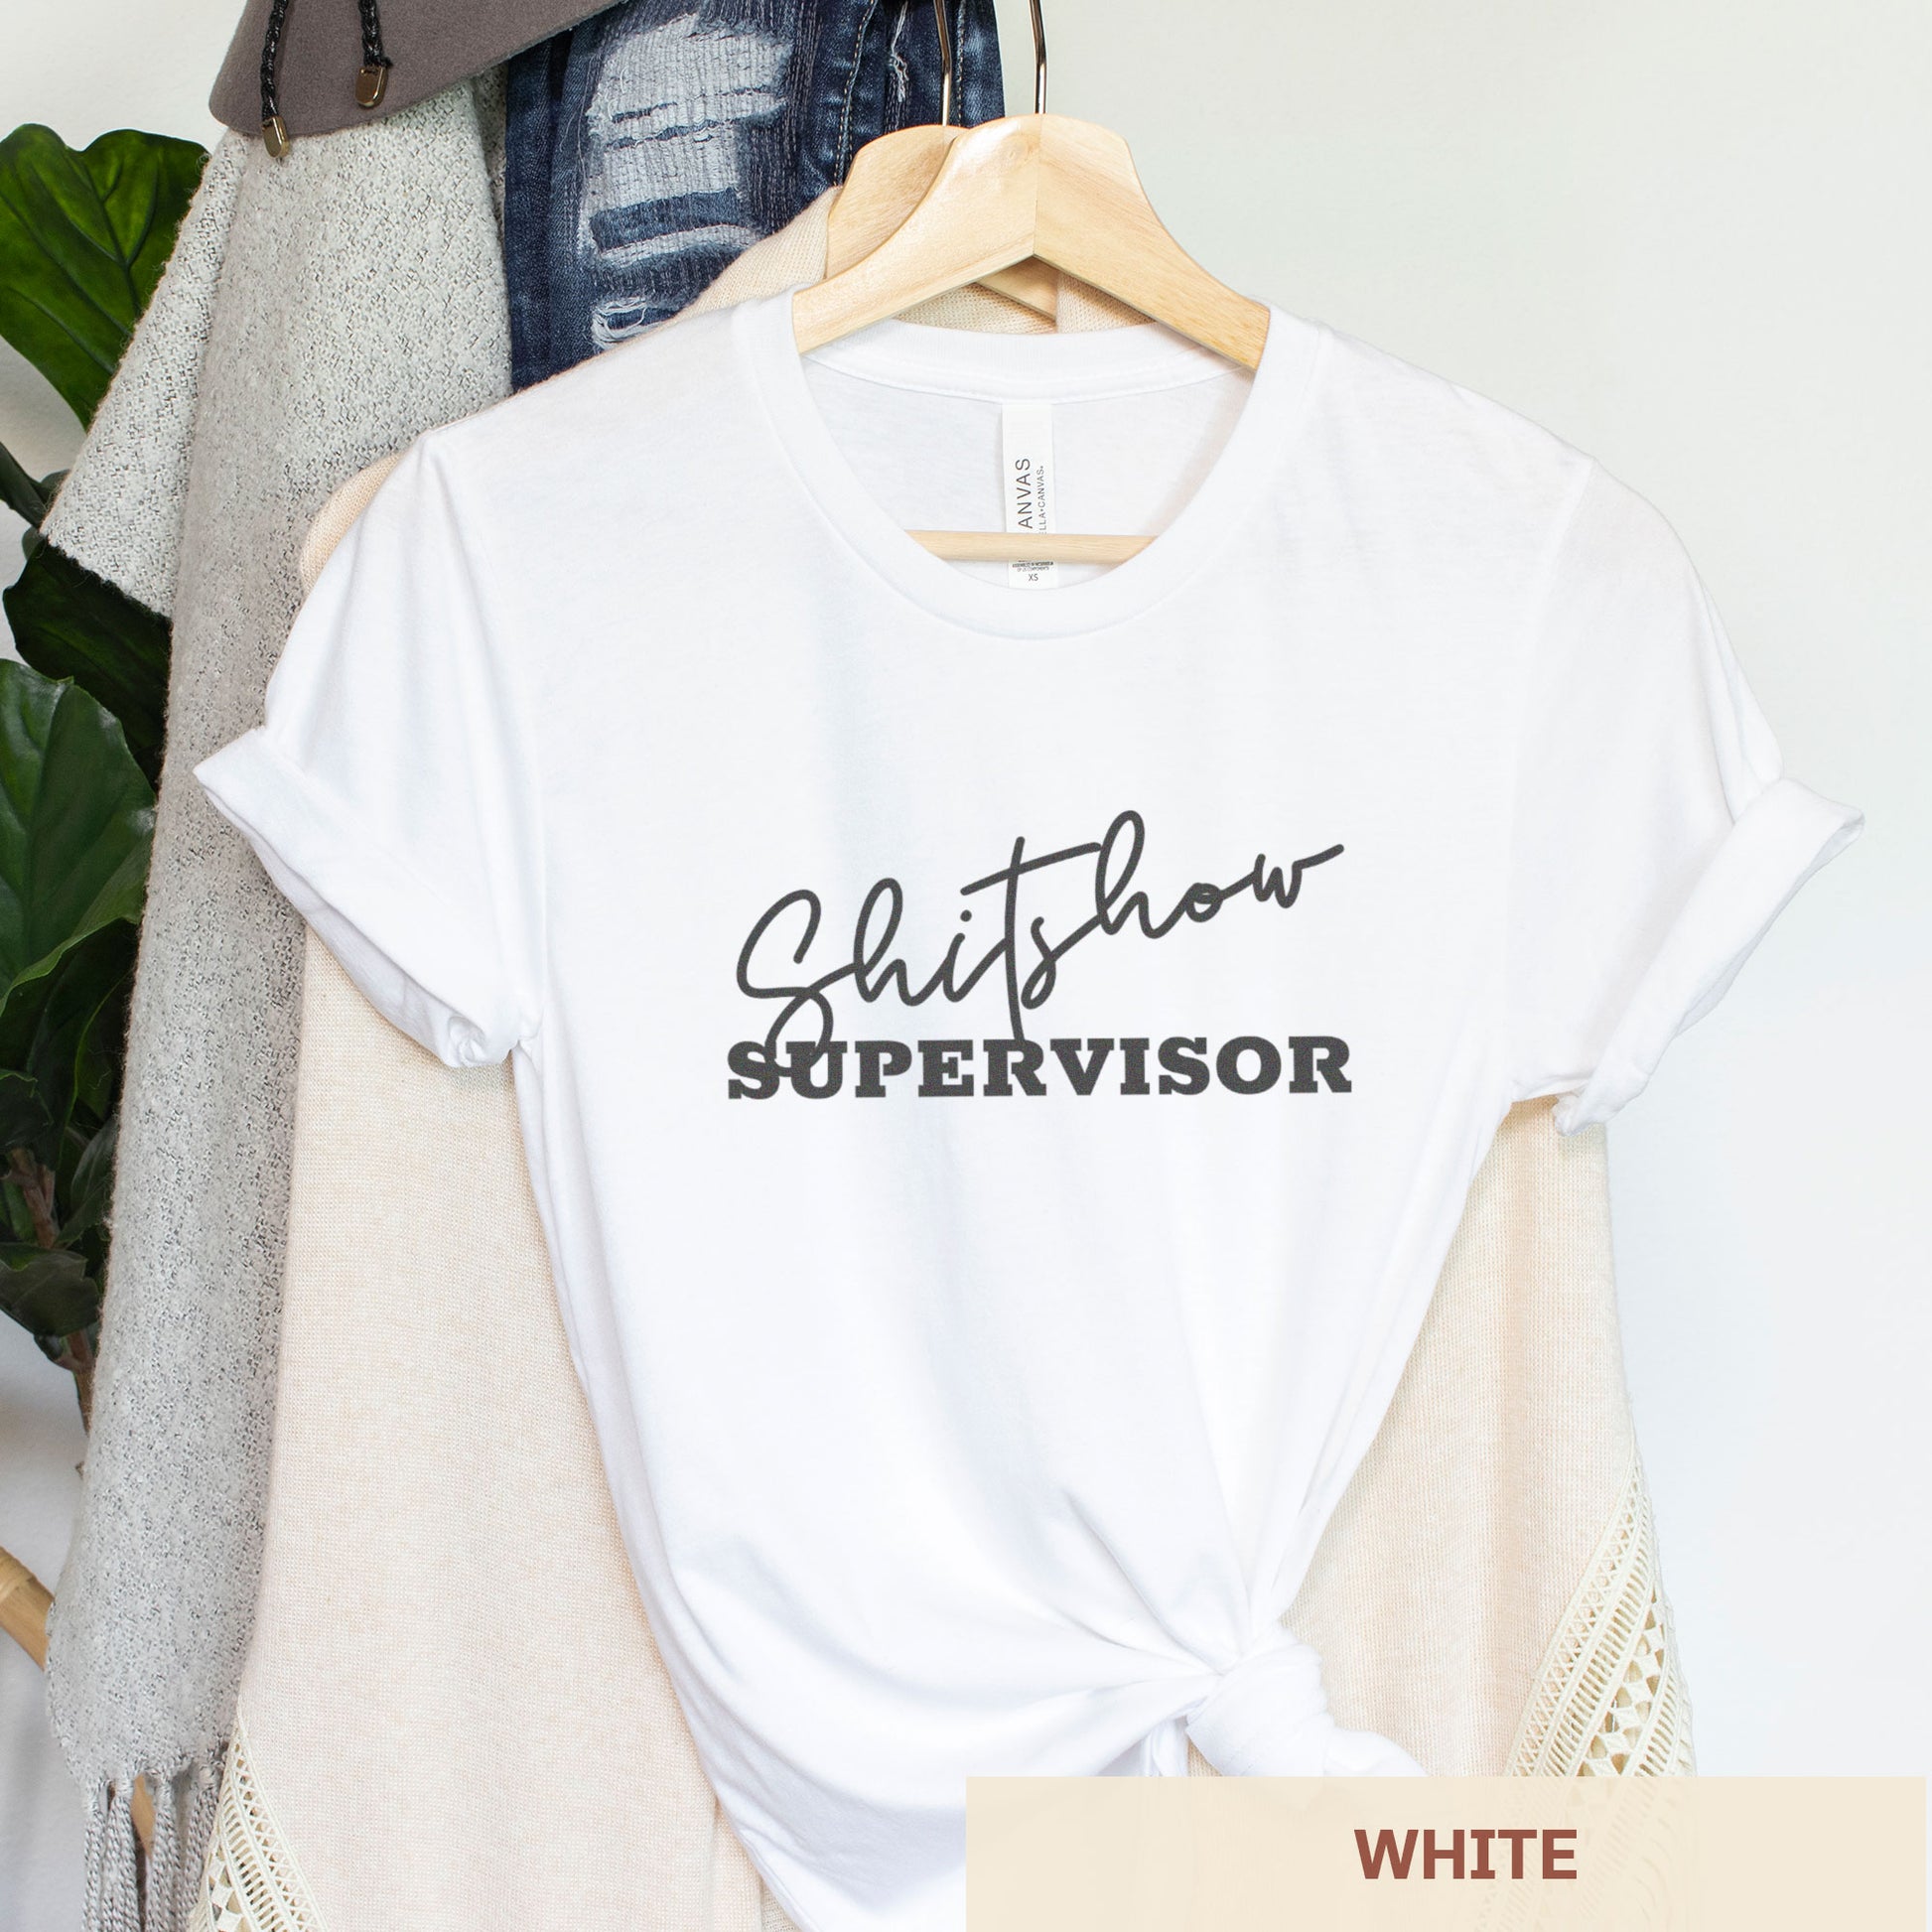 A hanging white Bella Canvas t-shirt featuring the text shitshow supervisor.